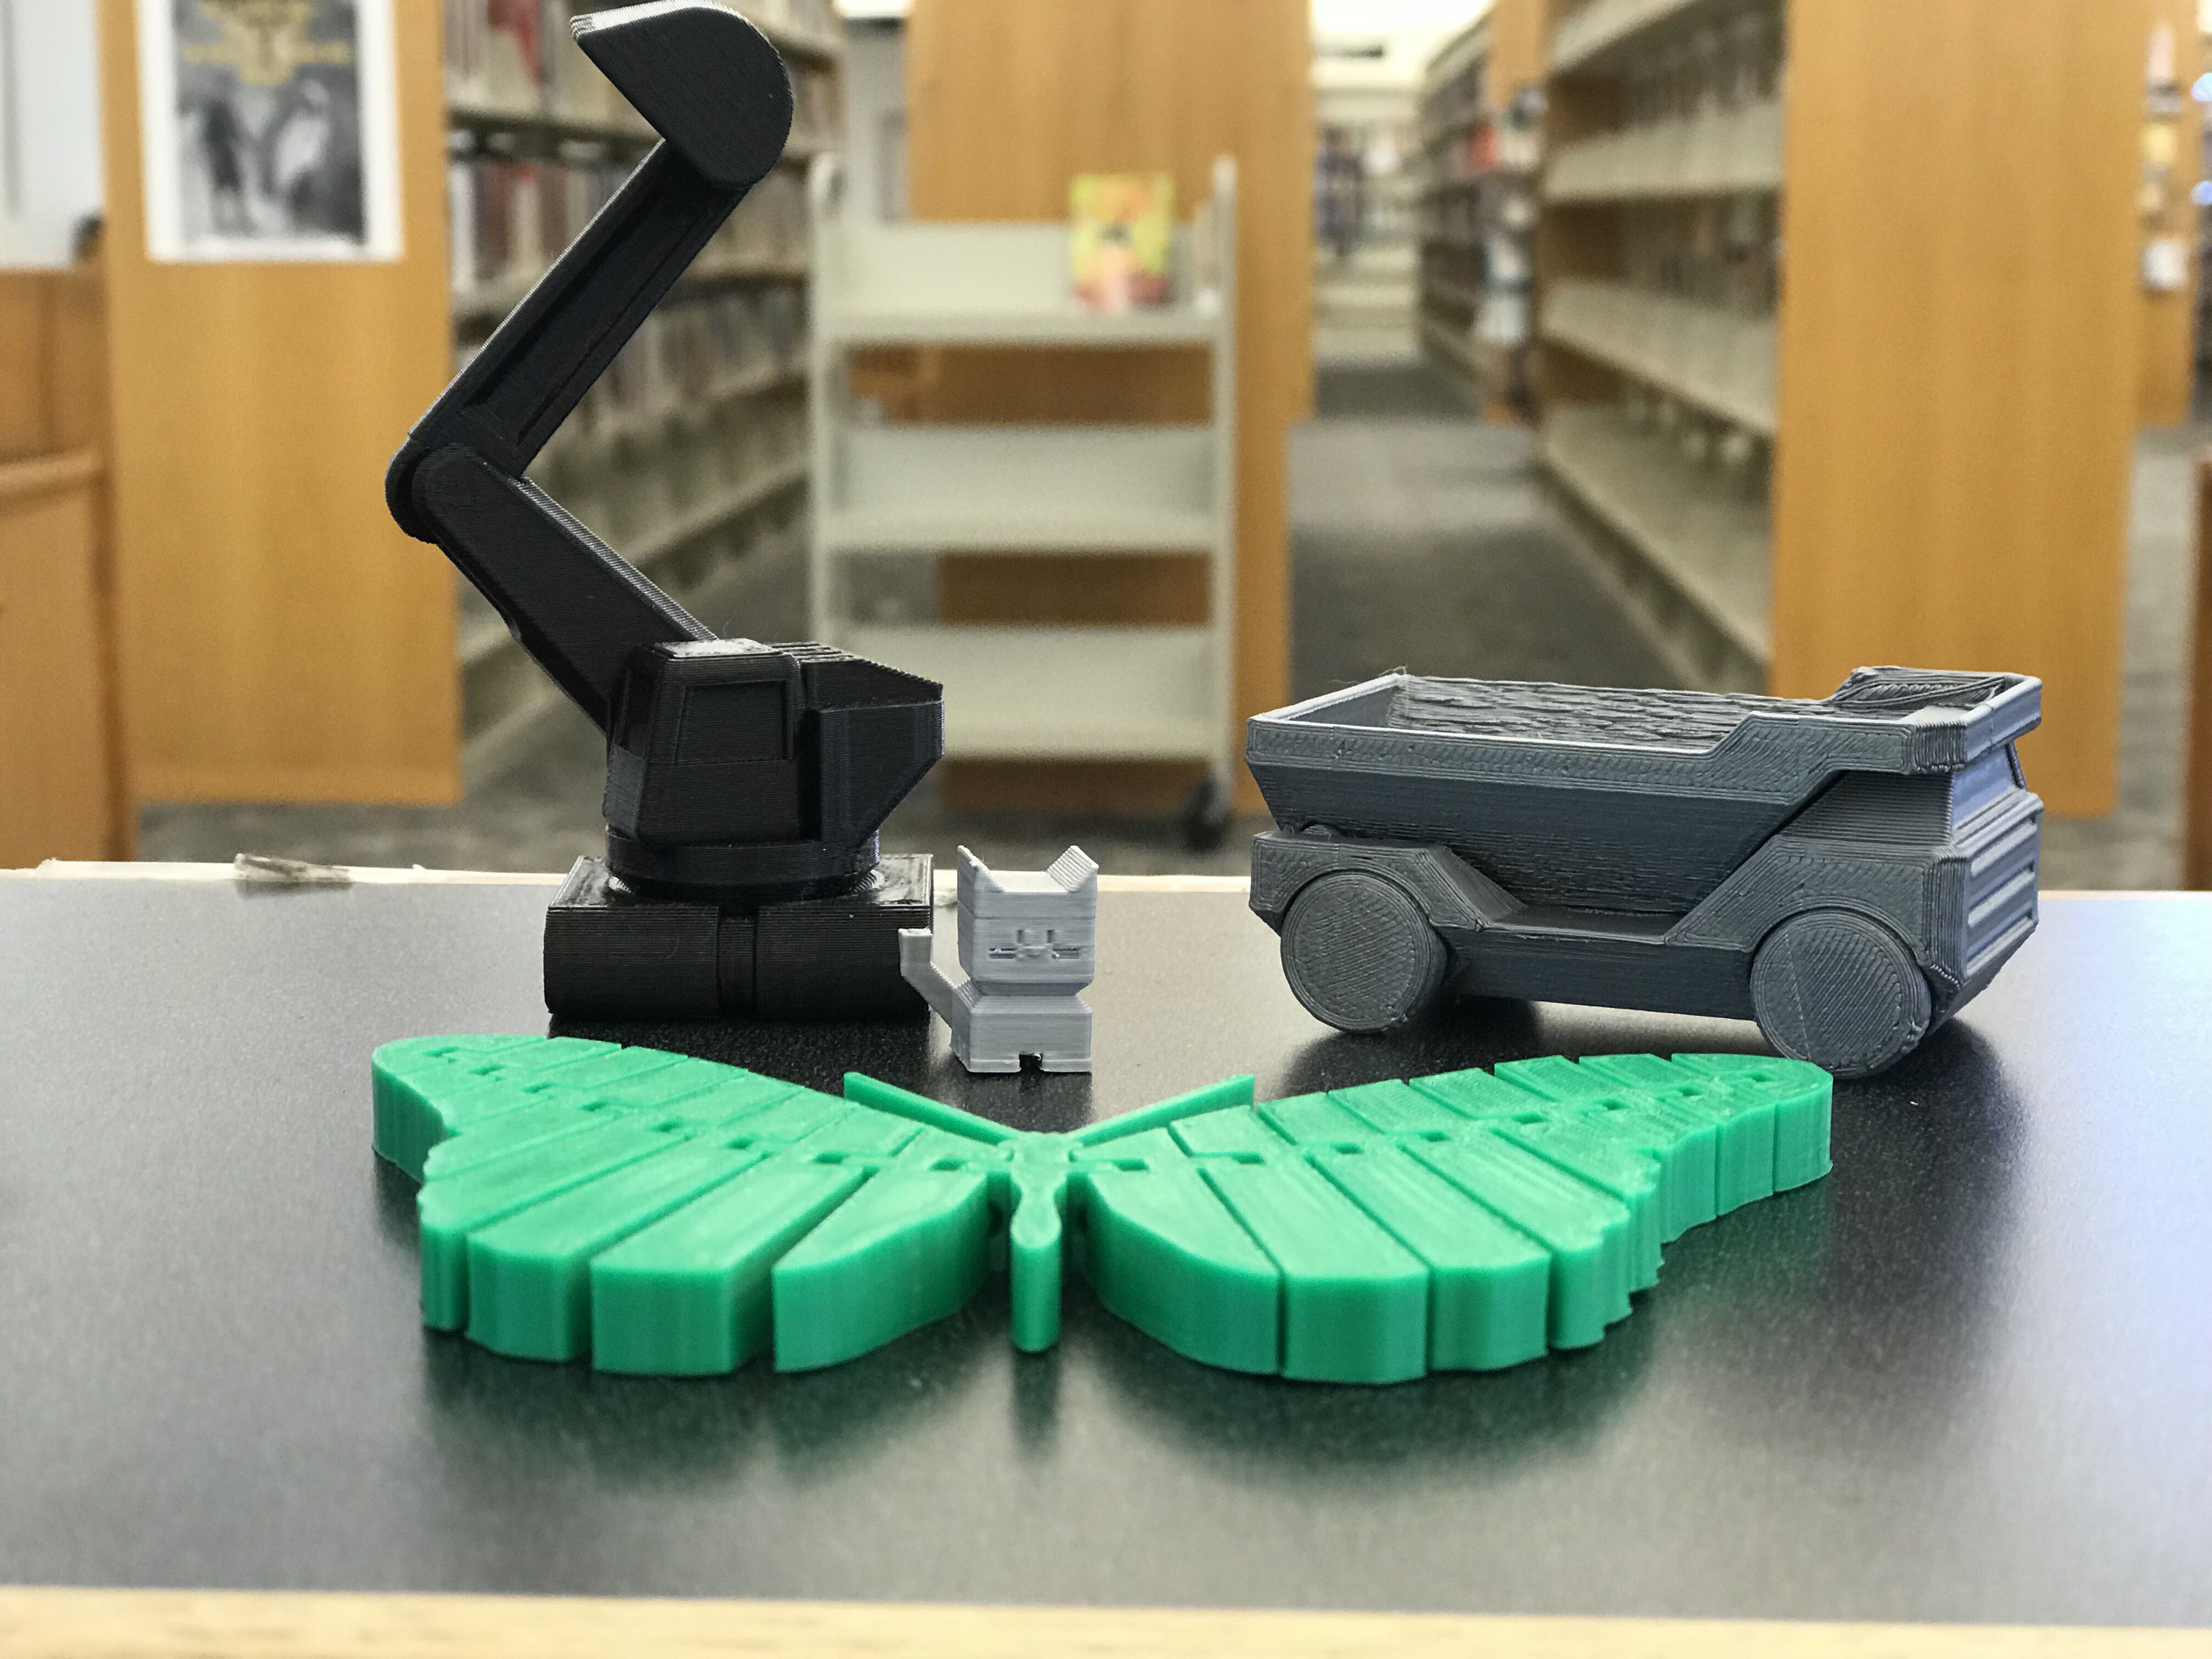 sample 3d printed objects on the reference desk